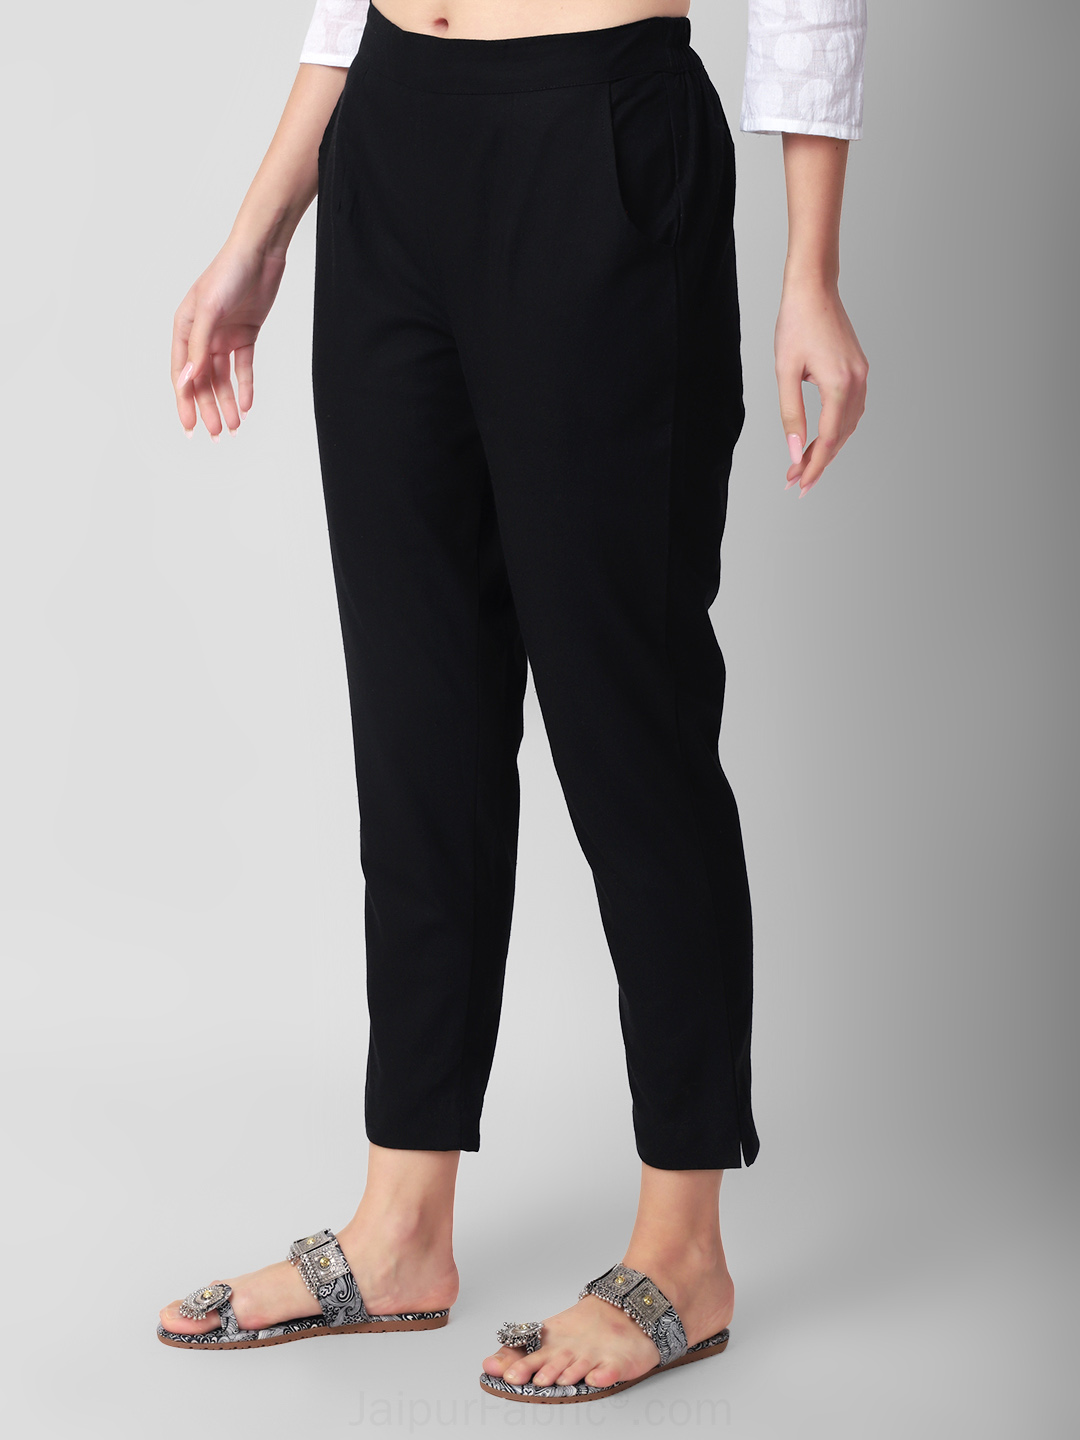 Jet Black Women Cotton Pants casual and semi formal daily trousers